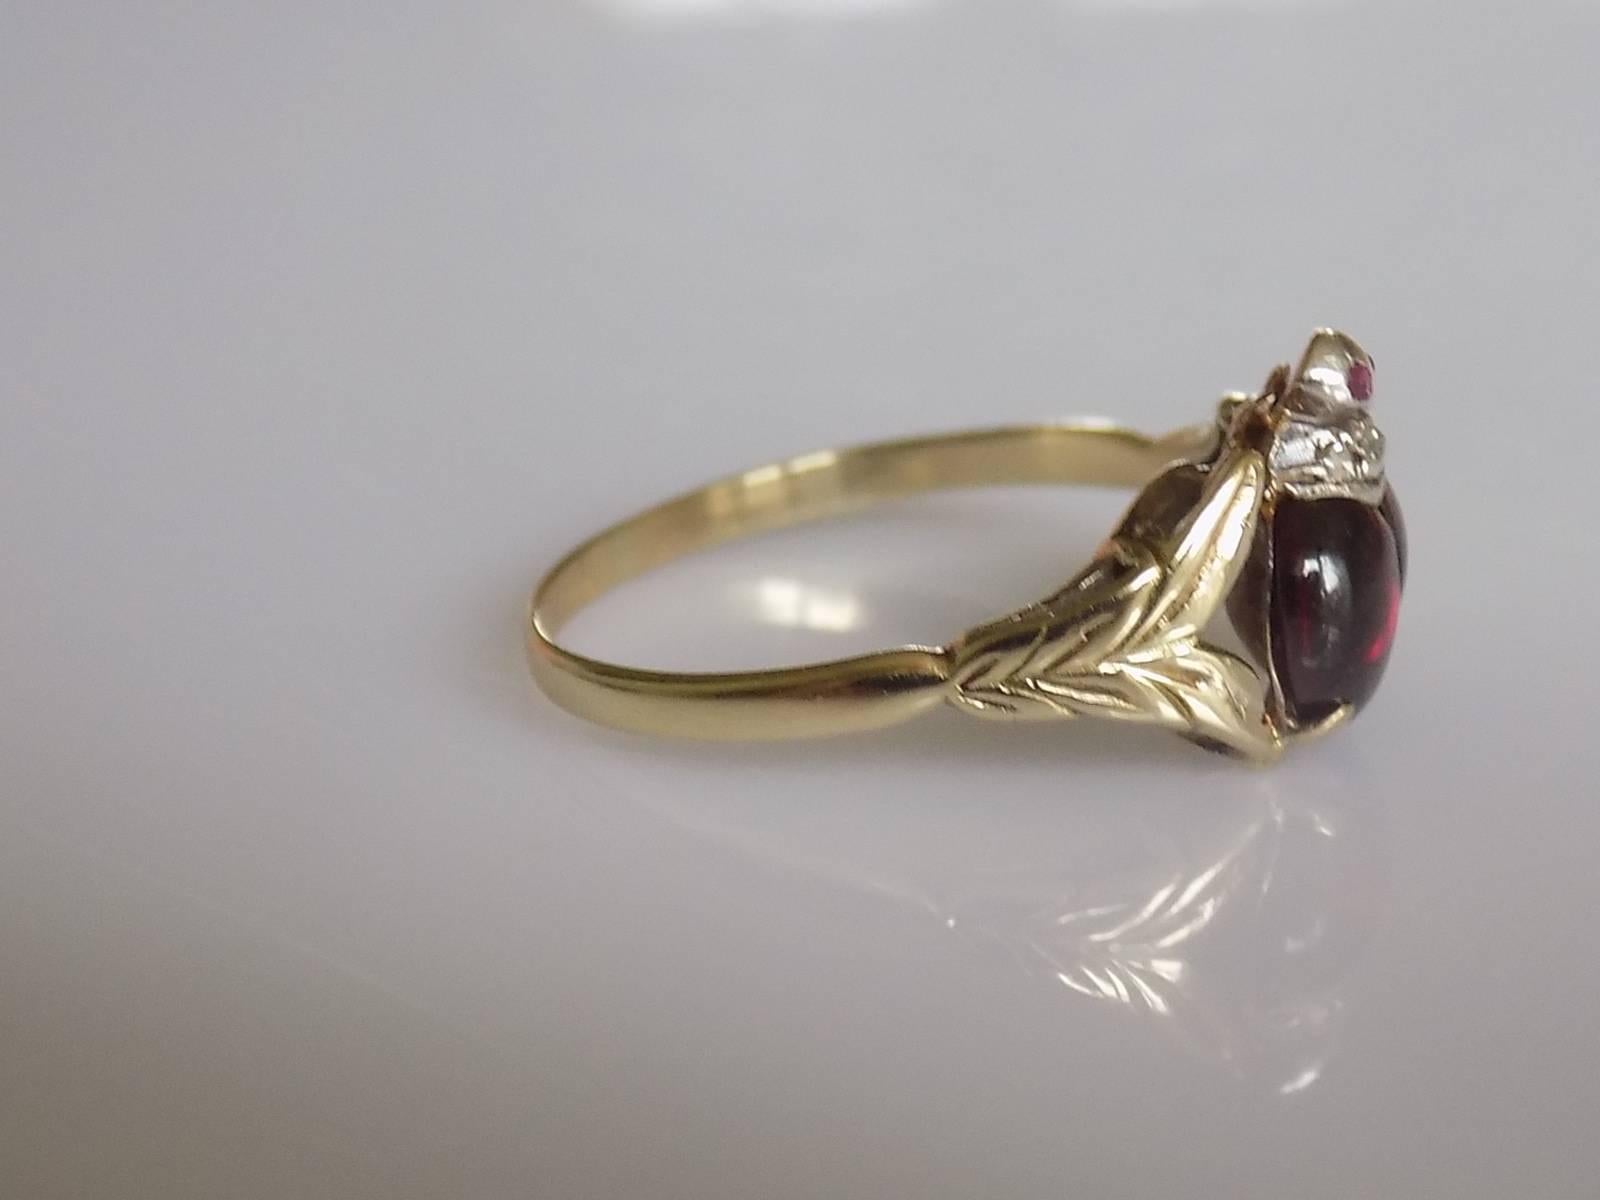 A Lovely Victorian Garnet and Rose cut Diamond Ladybird ring. Stones in Silver topped gold setting. A very unique and rare ring. English origin.

Size R UK, 9 US can be sized.
Height of the face 10mm.
Weight 3.0gr.
Unmarked.

Overall very good